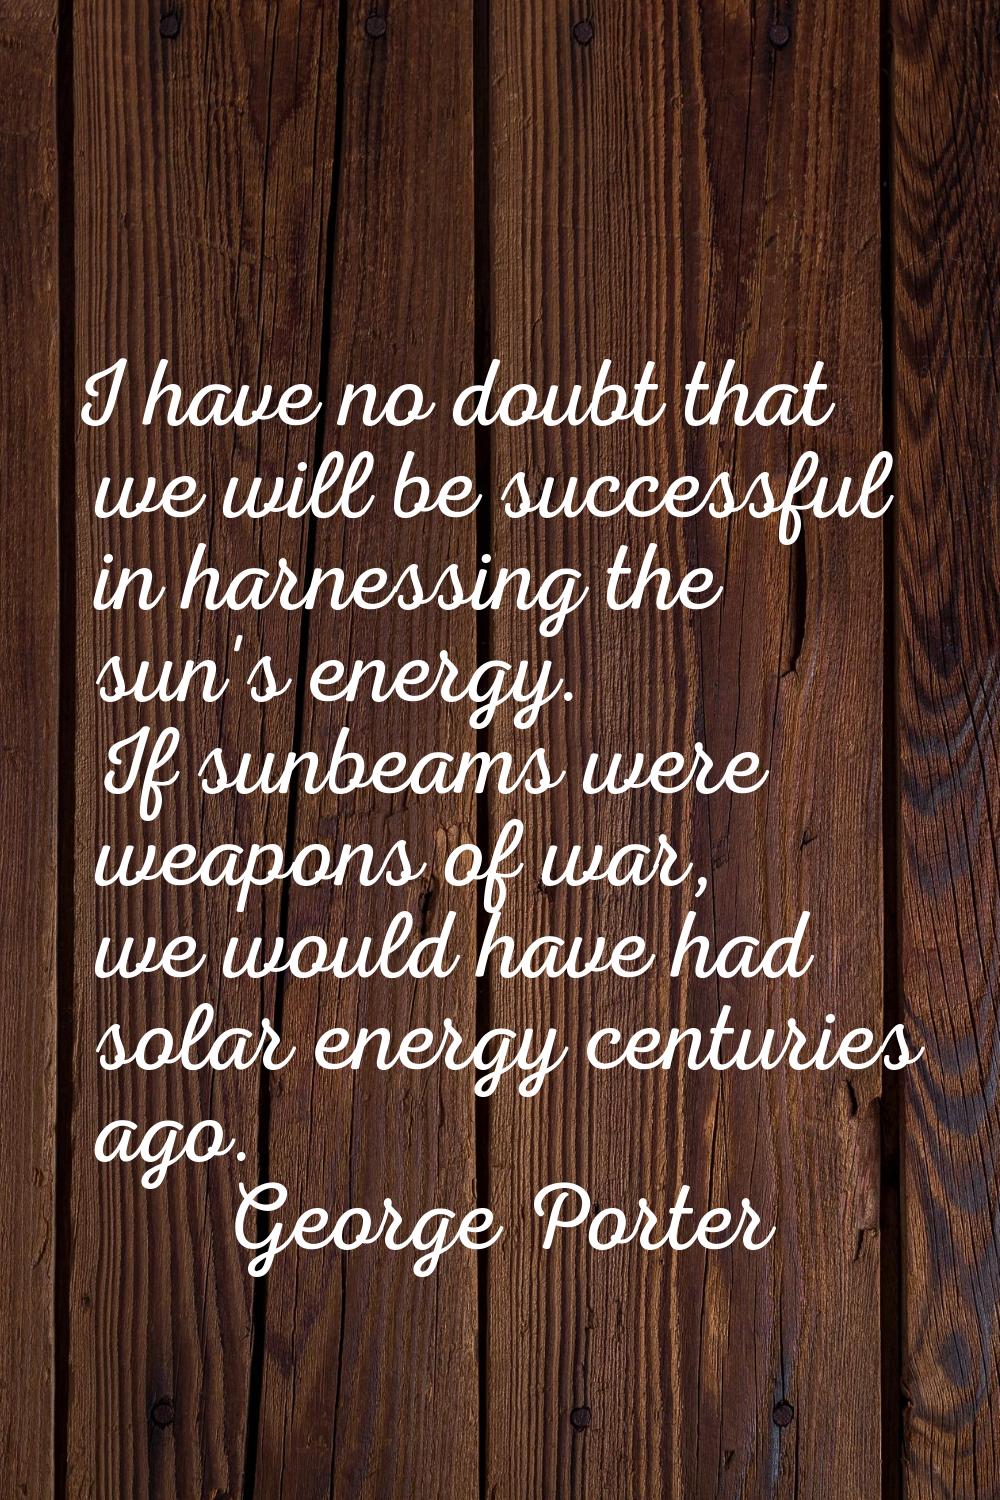 I have no doubt that we will be successful in harnessing the sun's energy. If sunbeams were weapons